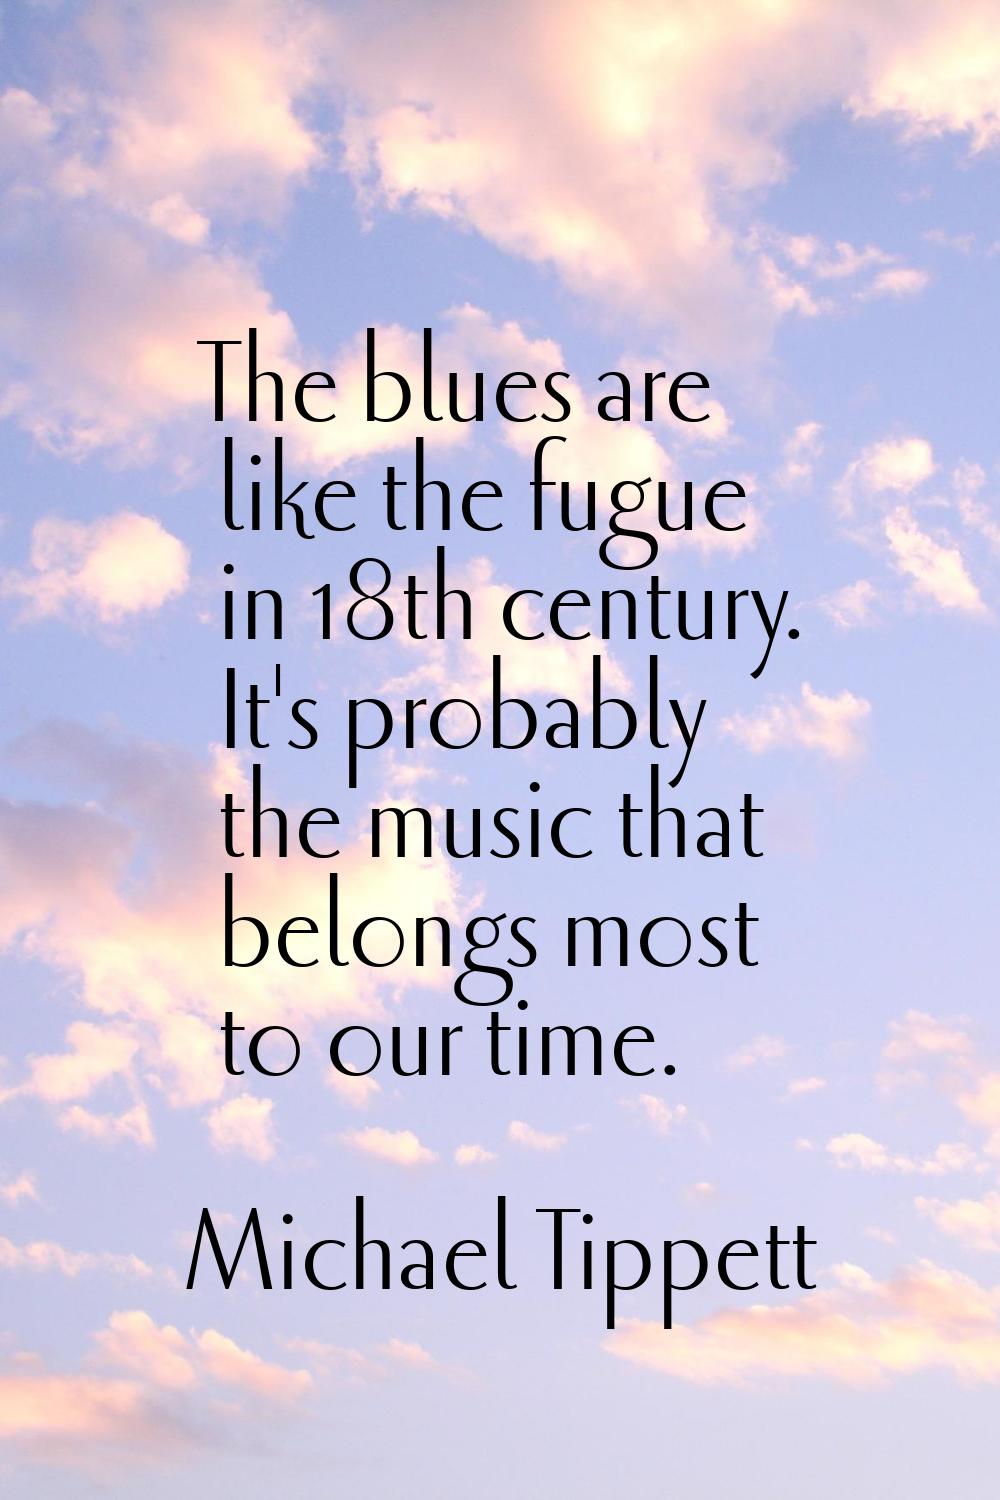 The blues are like the fugue in 18th century. It's probably the music that belongs most to our time